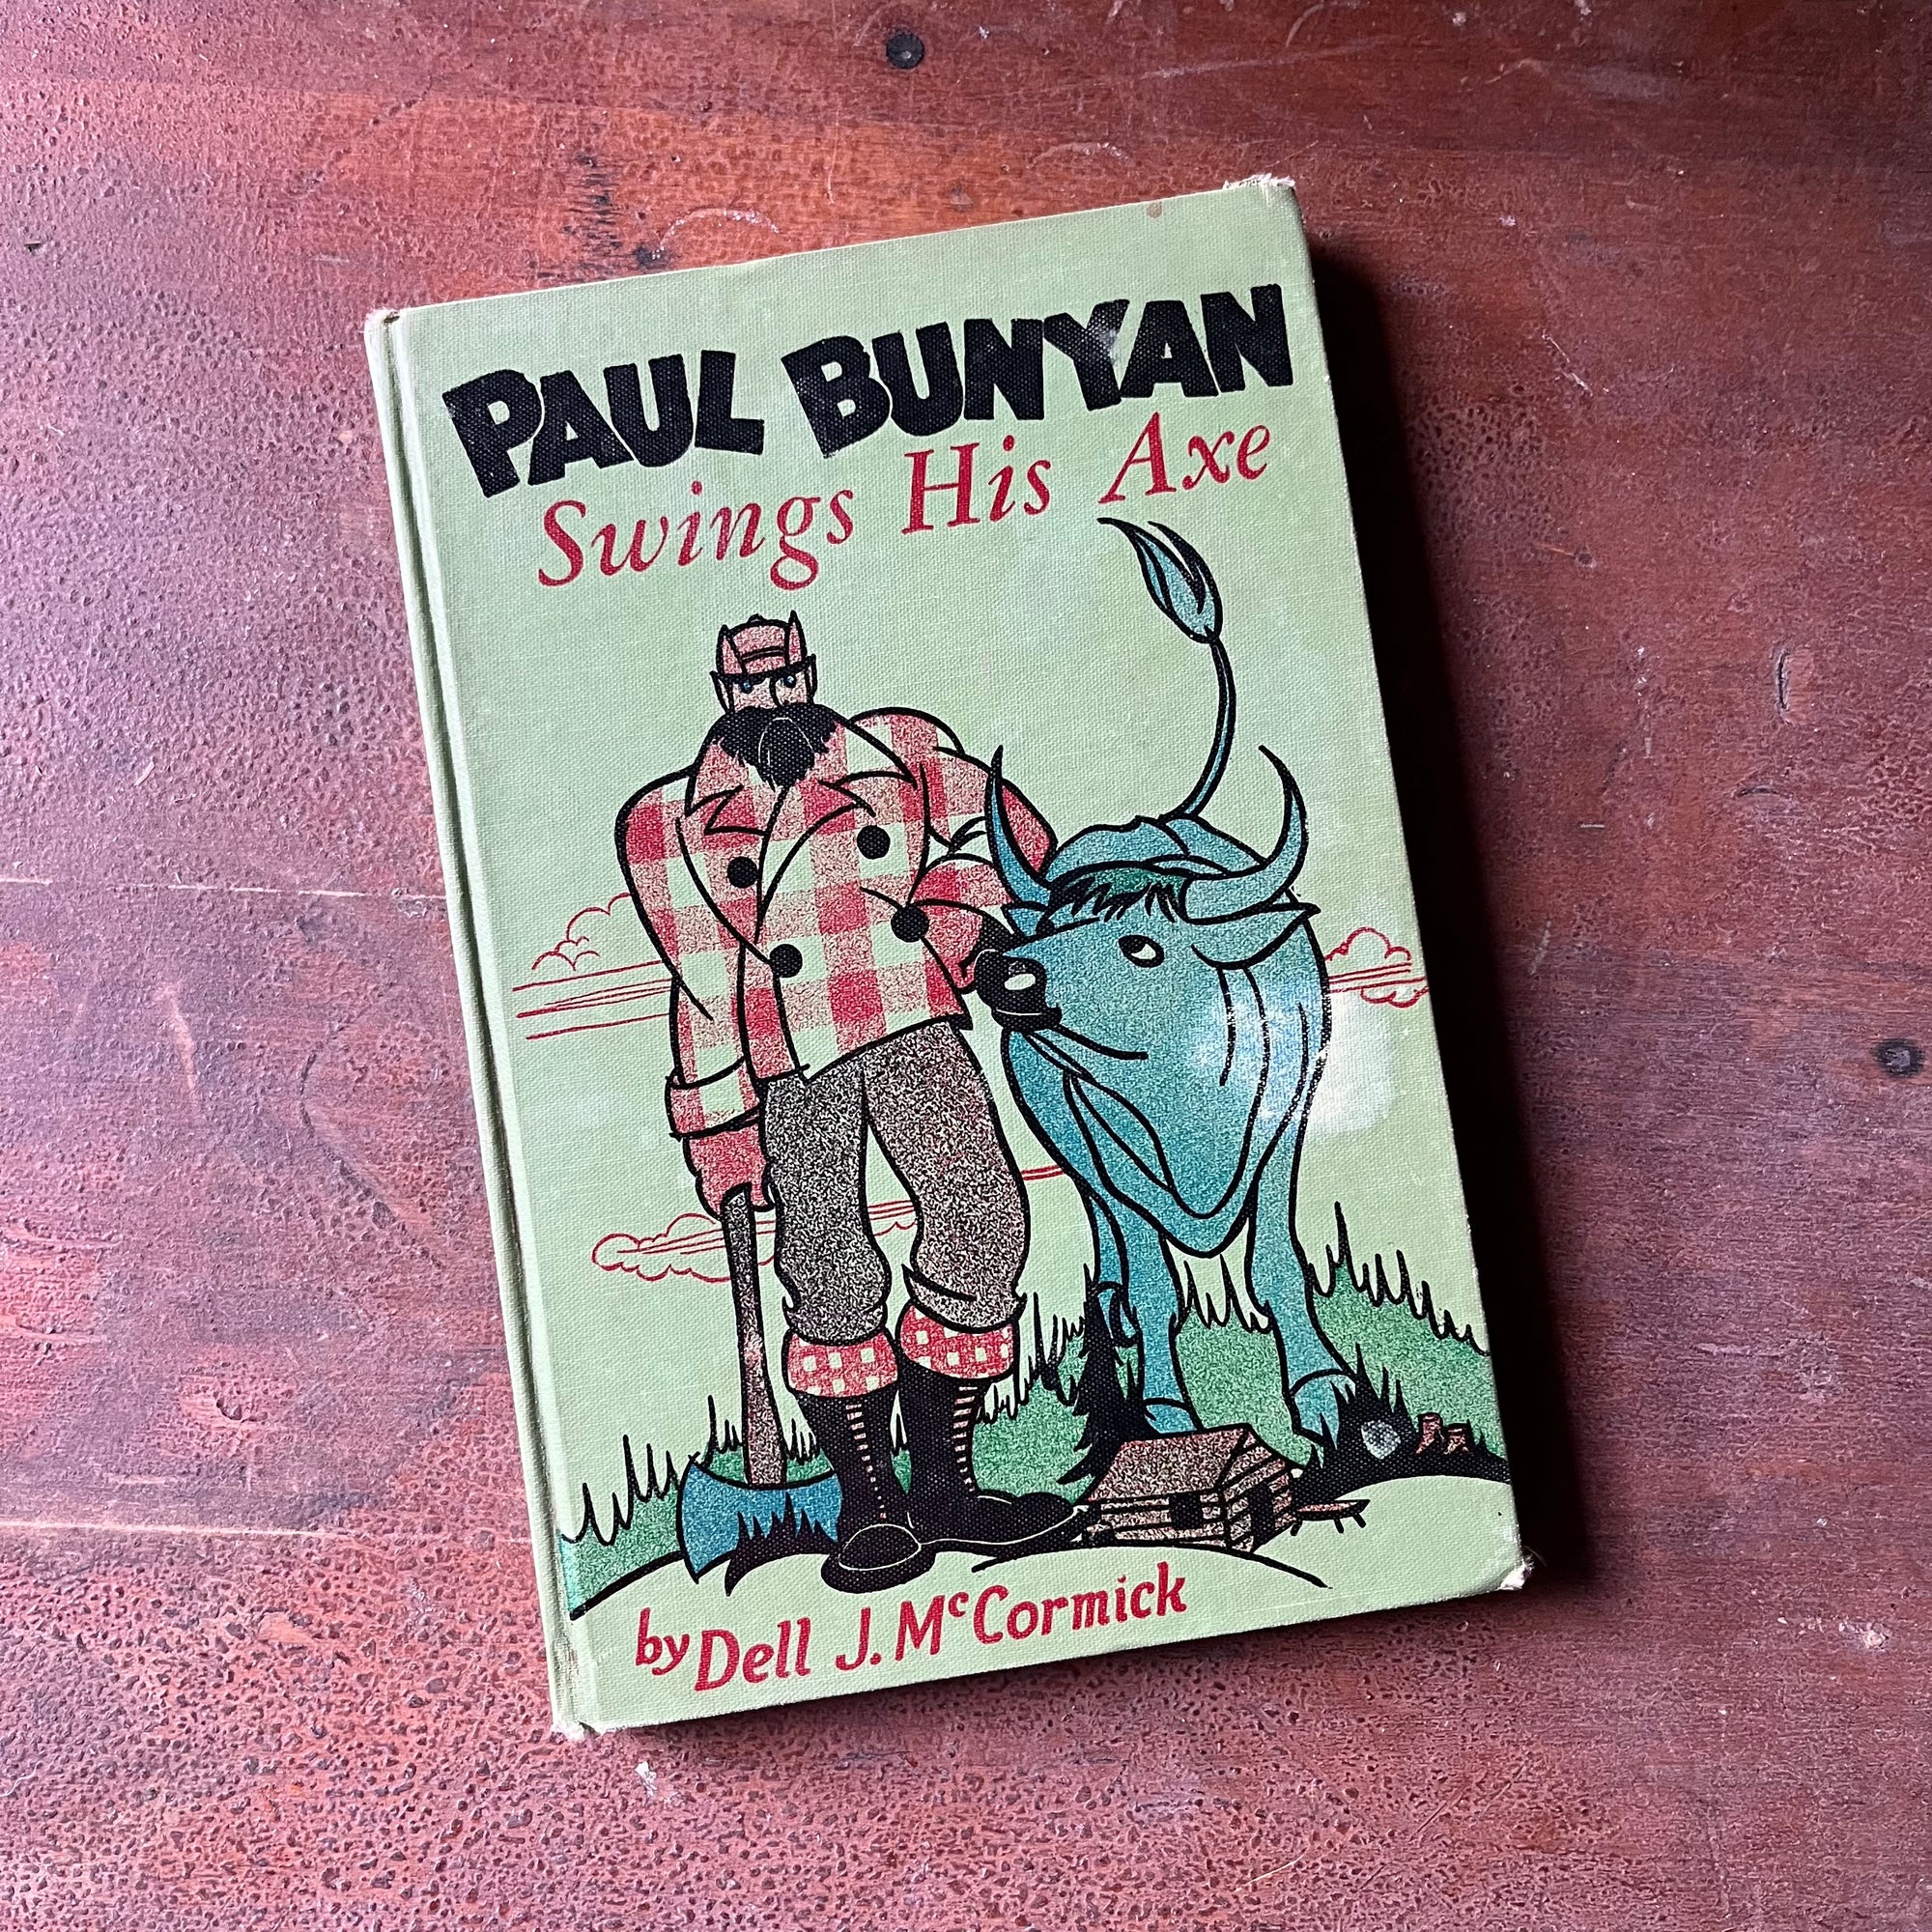 Paul Bunyan Swings His Axe by Dell J. McCormick - view of the front cover